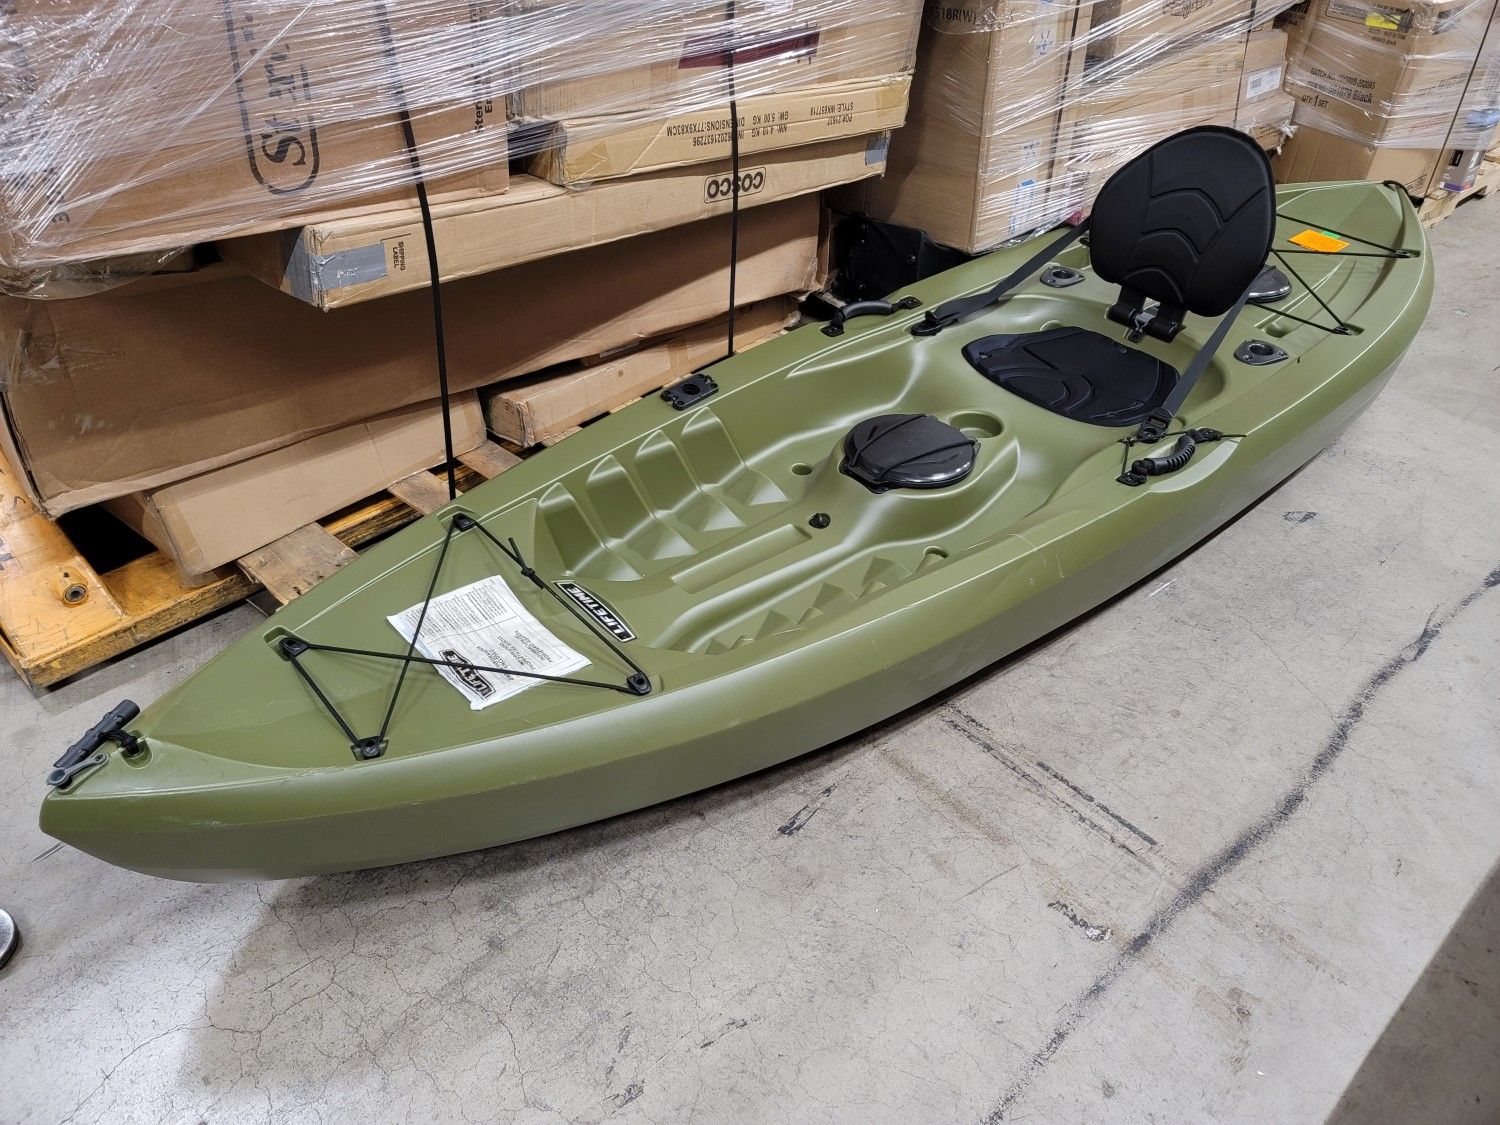 LIFETIME TAMRACK KAYAK WITH PADDLE (READ THE DESCRIPTION) $200 FIRM FIRM FIRM